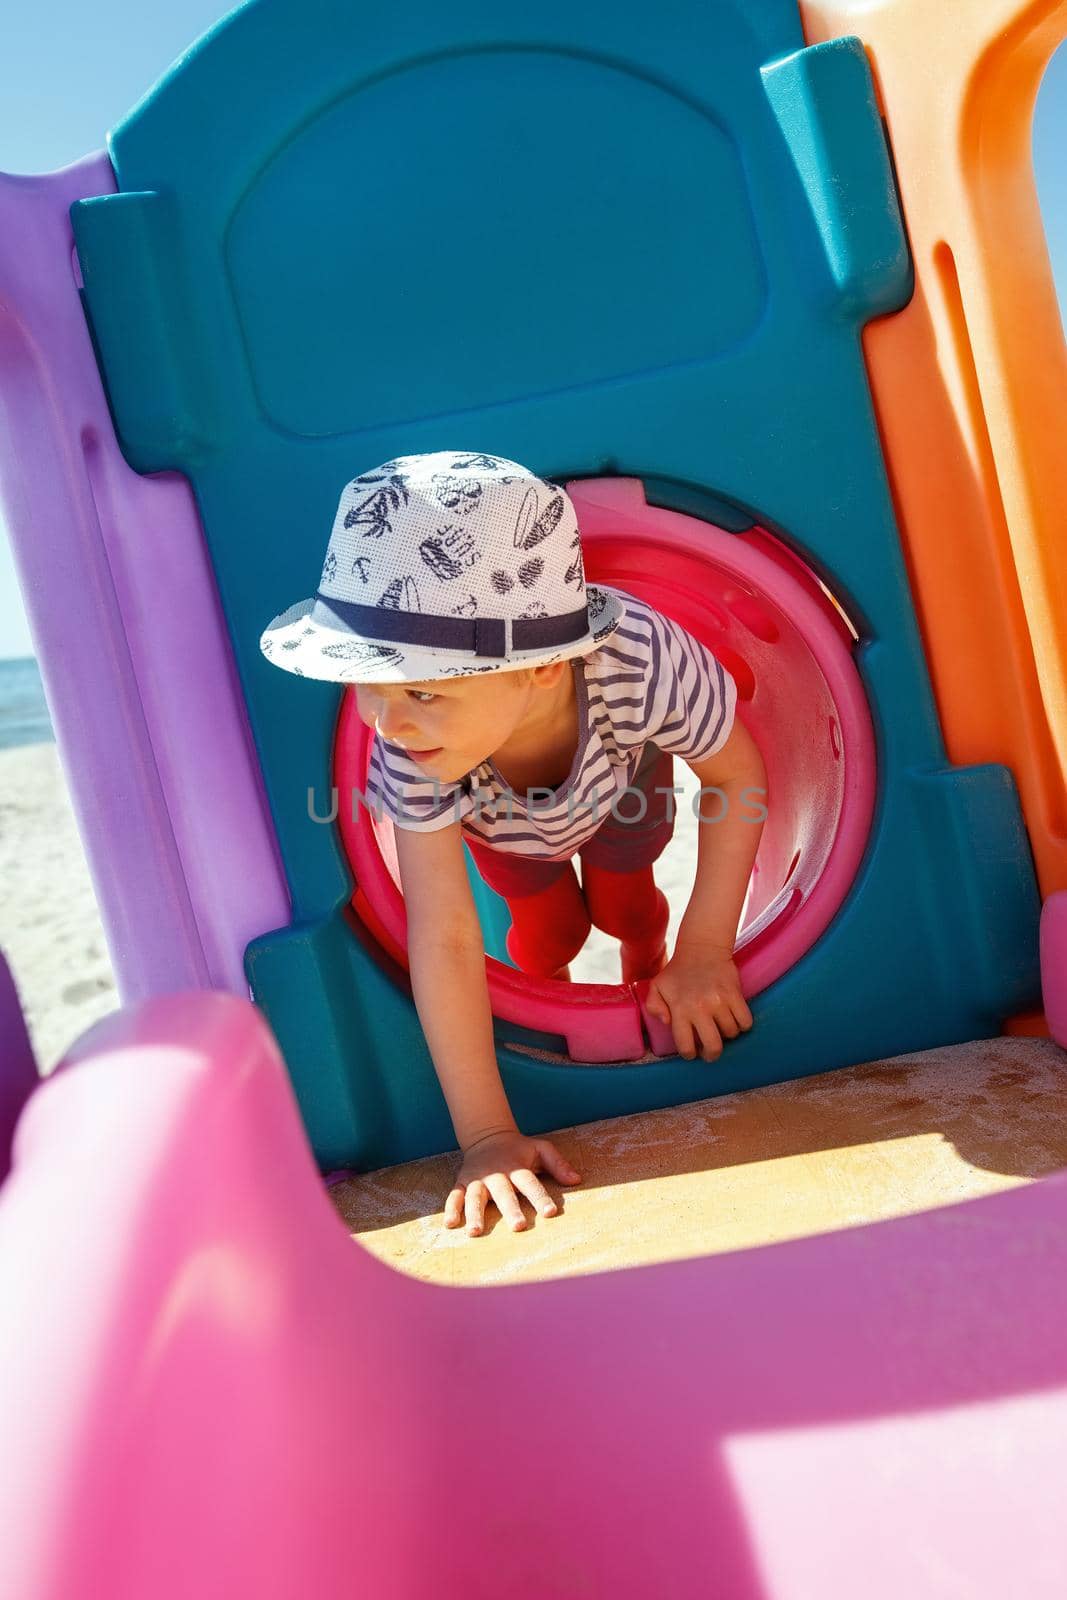 A child plays on a colourful, plastic beach playground, he emerges from a tunnel